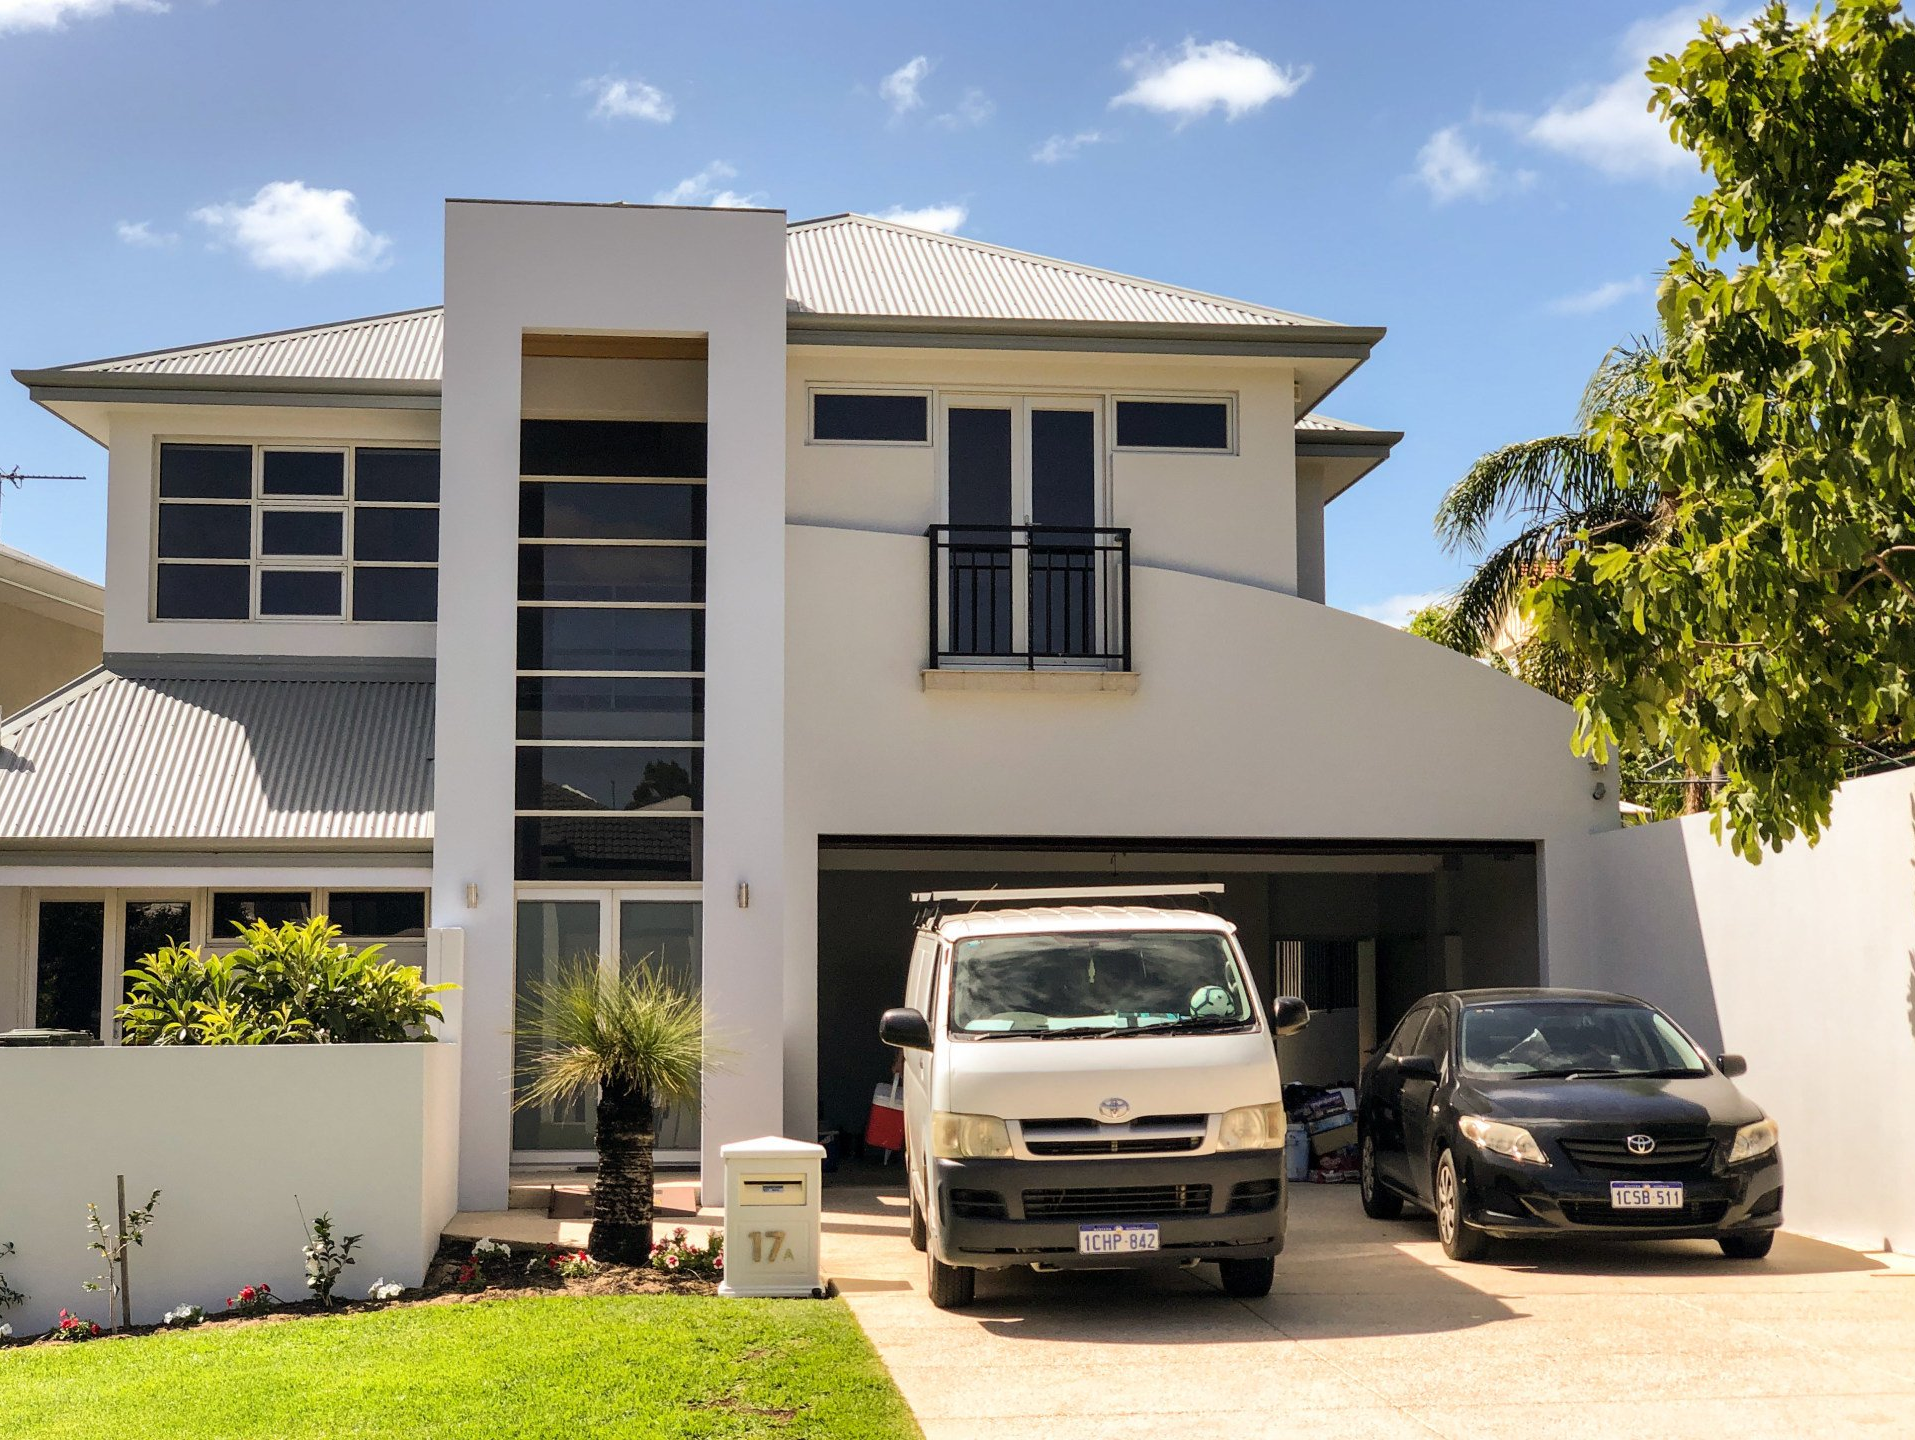 Two story white perth home with ABC Paint & Deco van outside